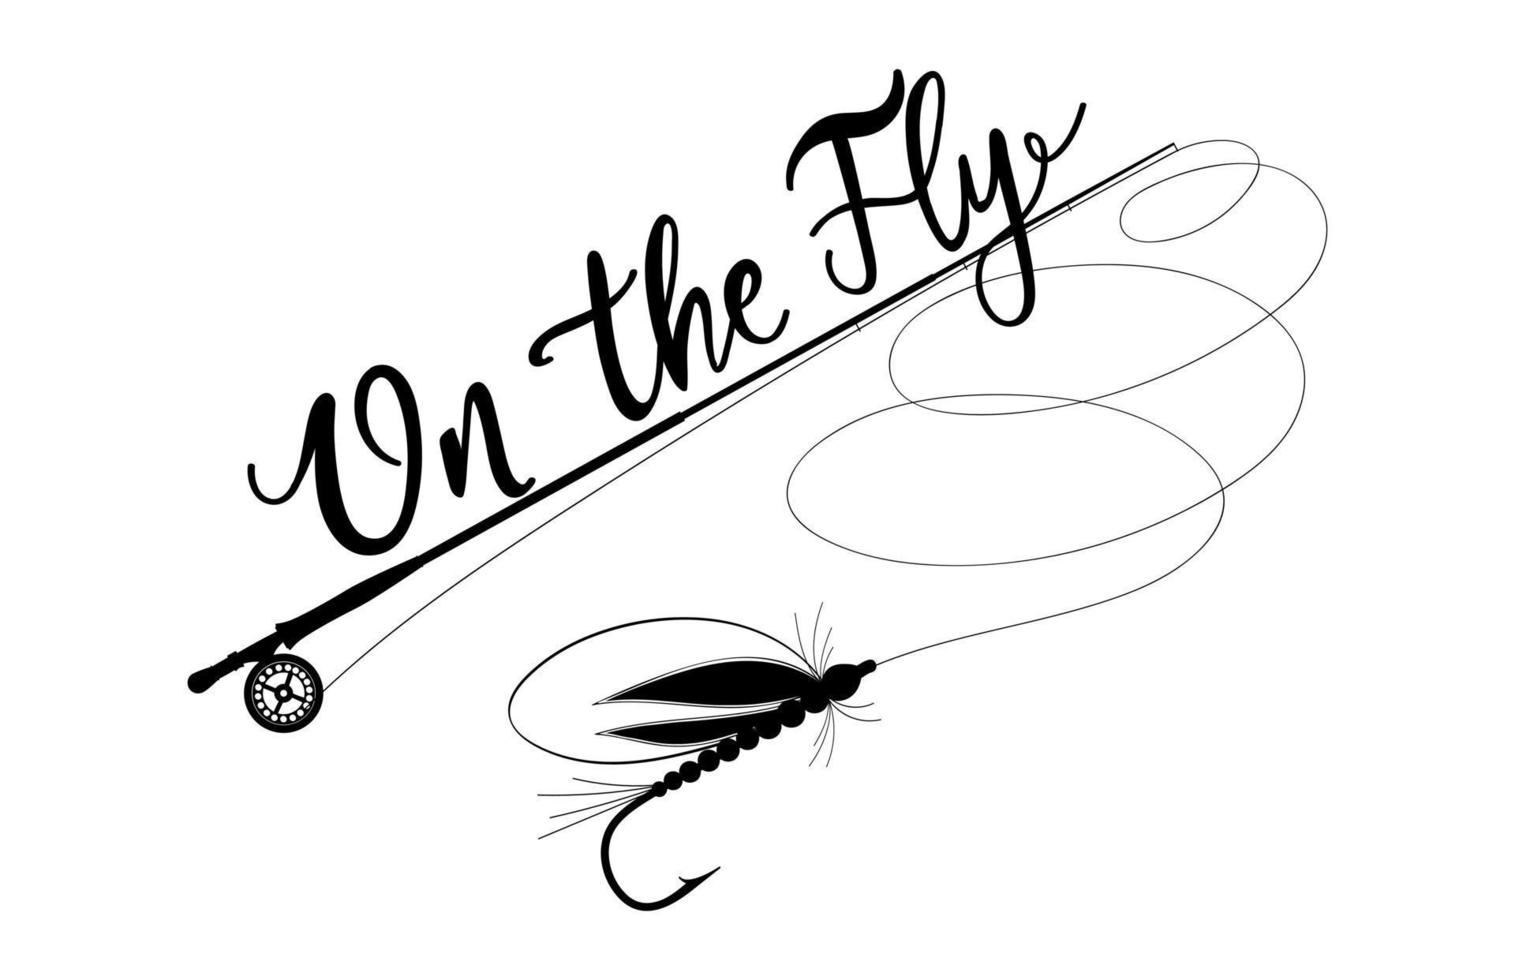 On the fly. Fishing rod with fly fishing lure. Hand drawn vector